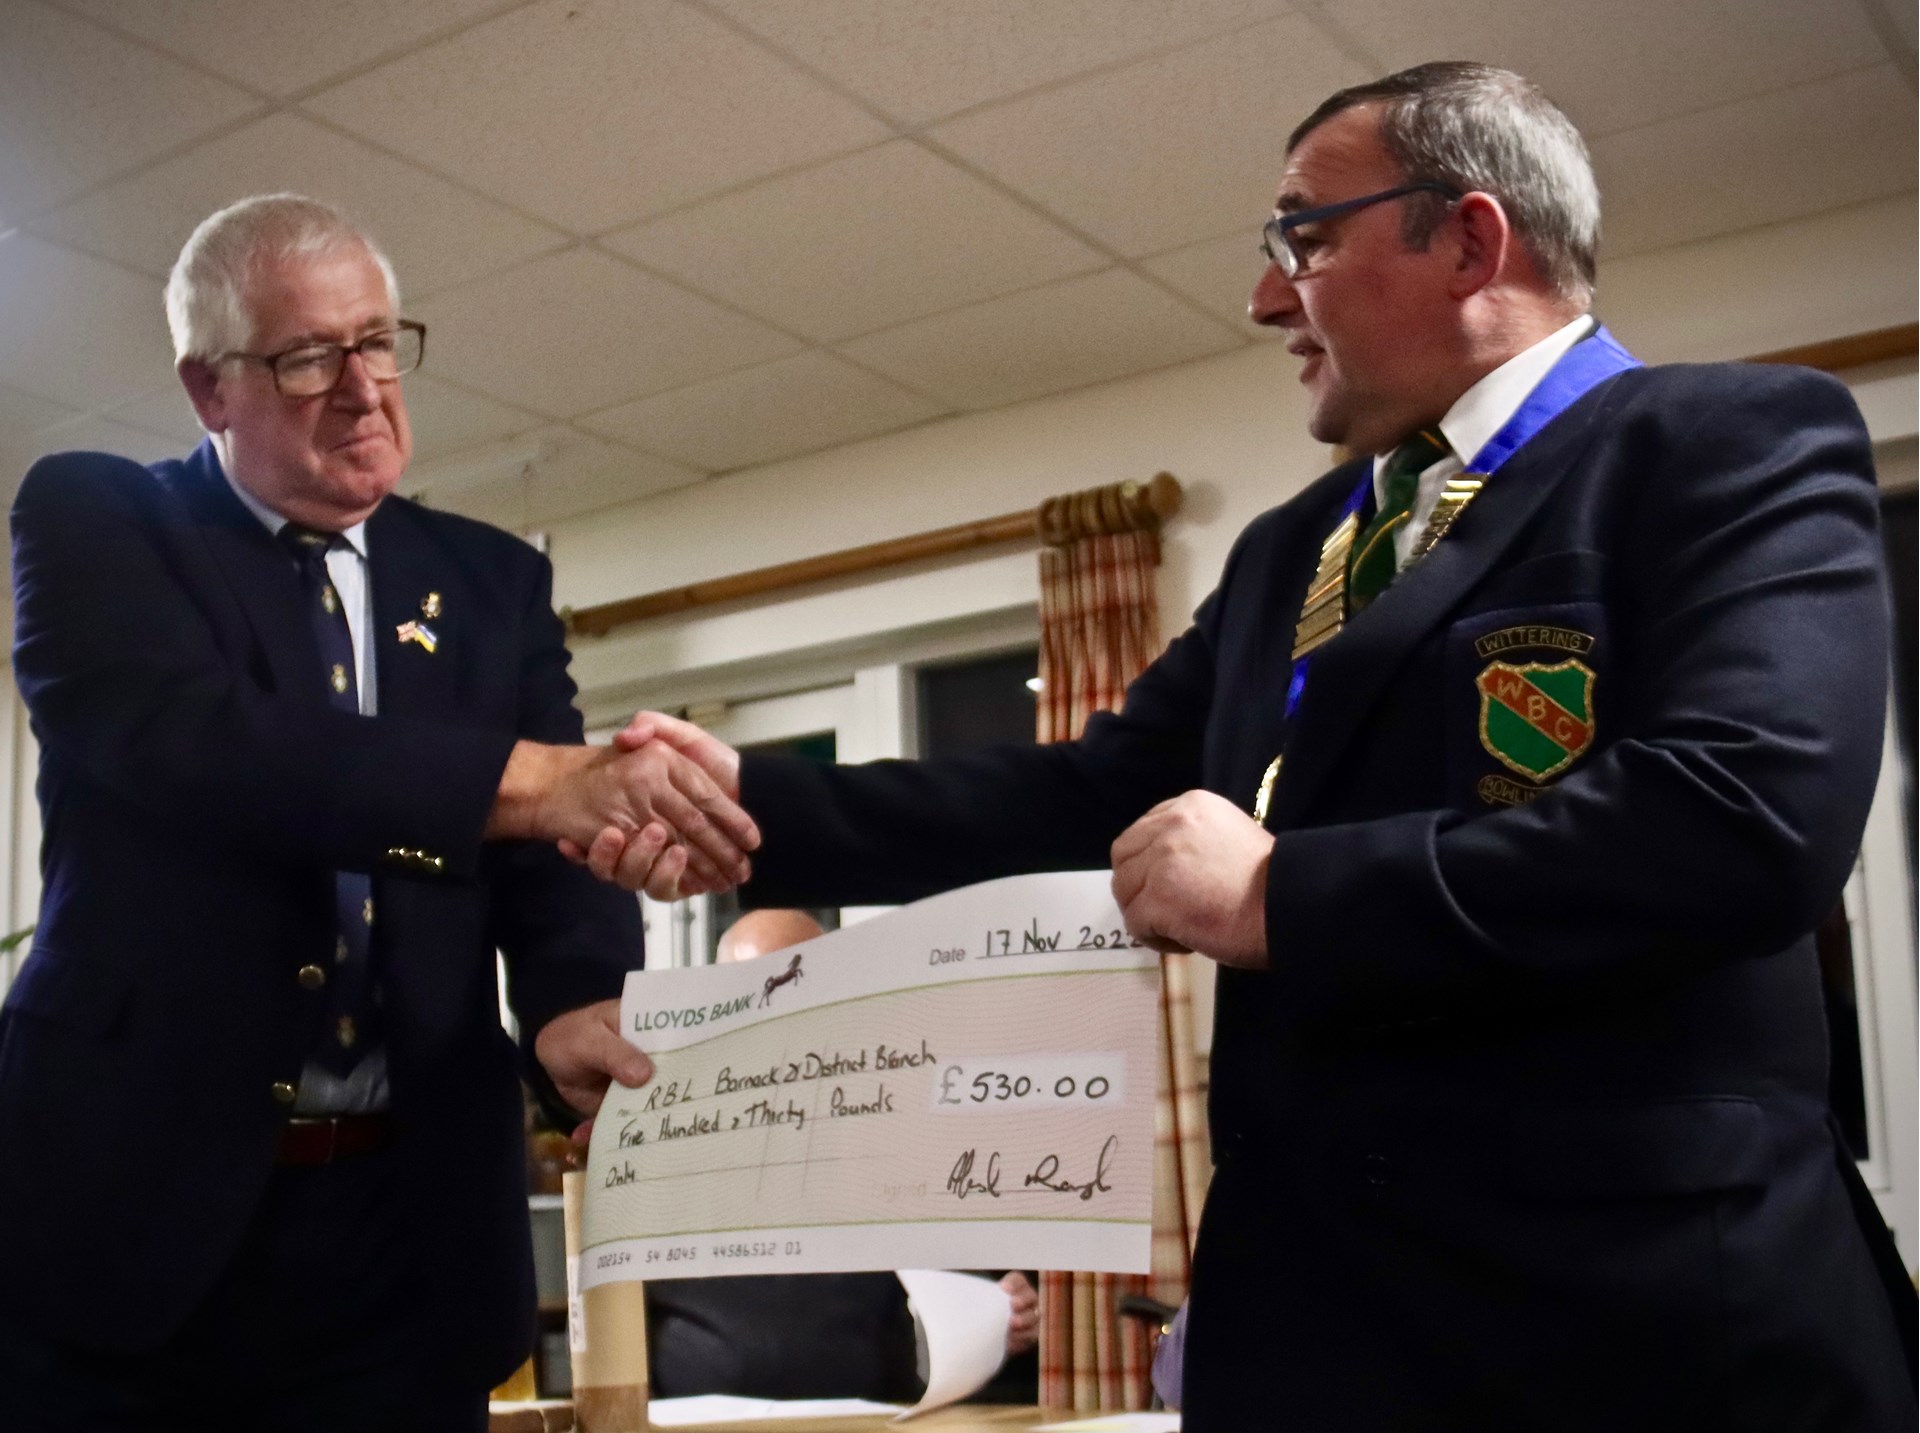 President Ally McNaughton presents a cheque for £530 to Max Sawyer, President of the Royal British Legion, Barnack and District Branch